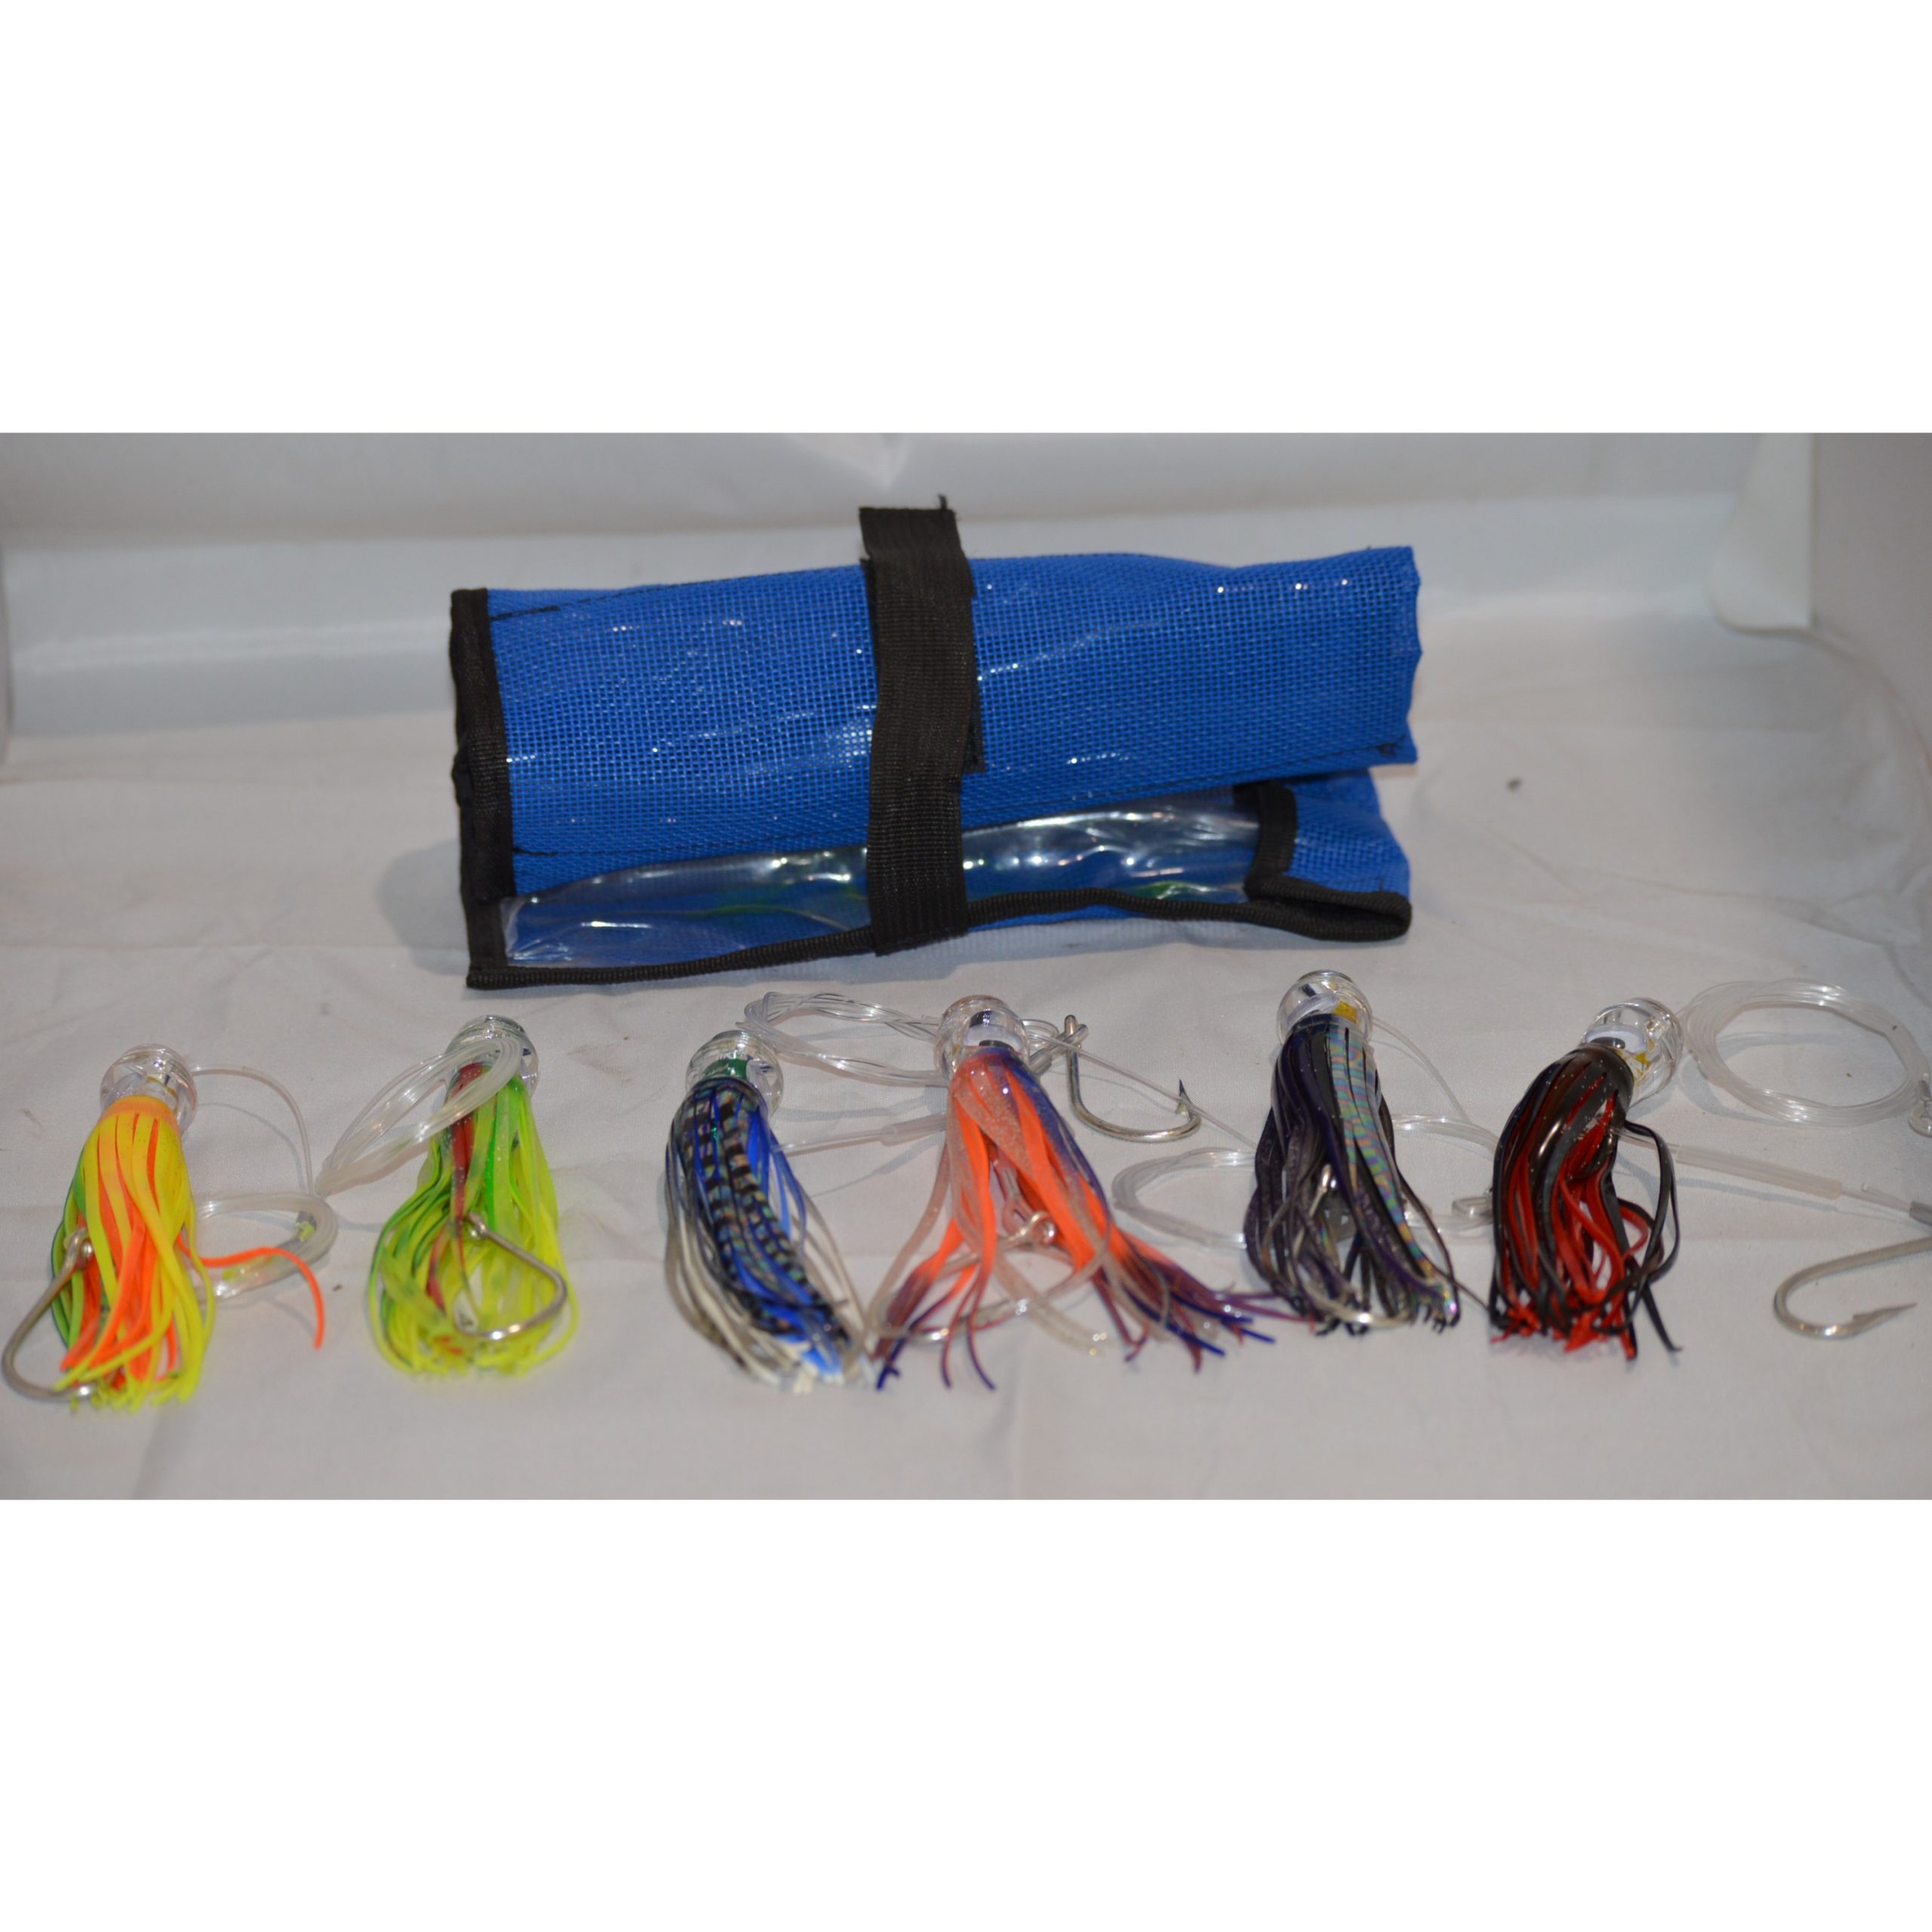 Skirted Trolling Lures Bag - X6 Pcs. With Rigged Line & Hook